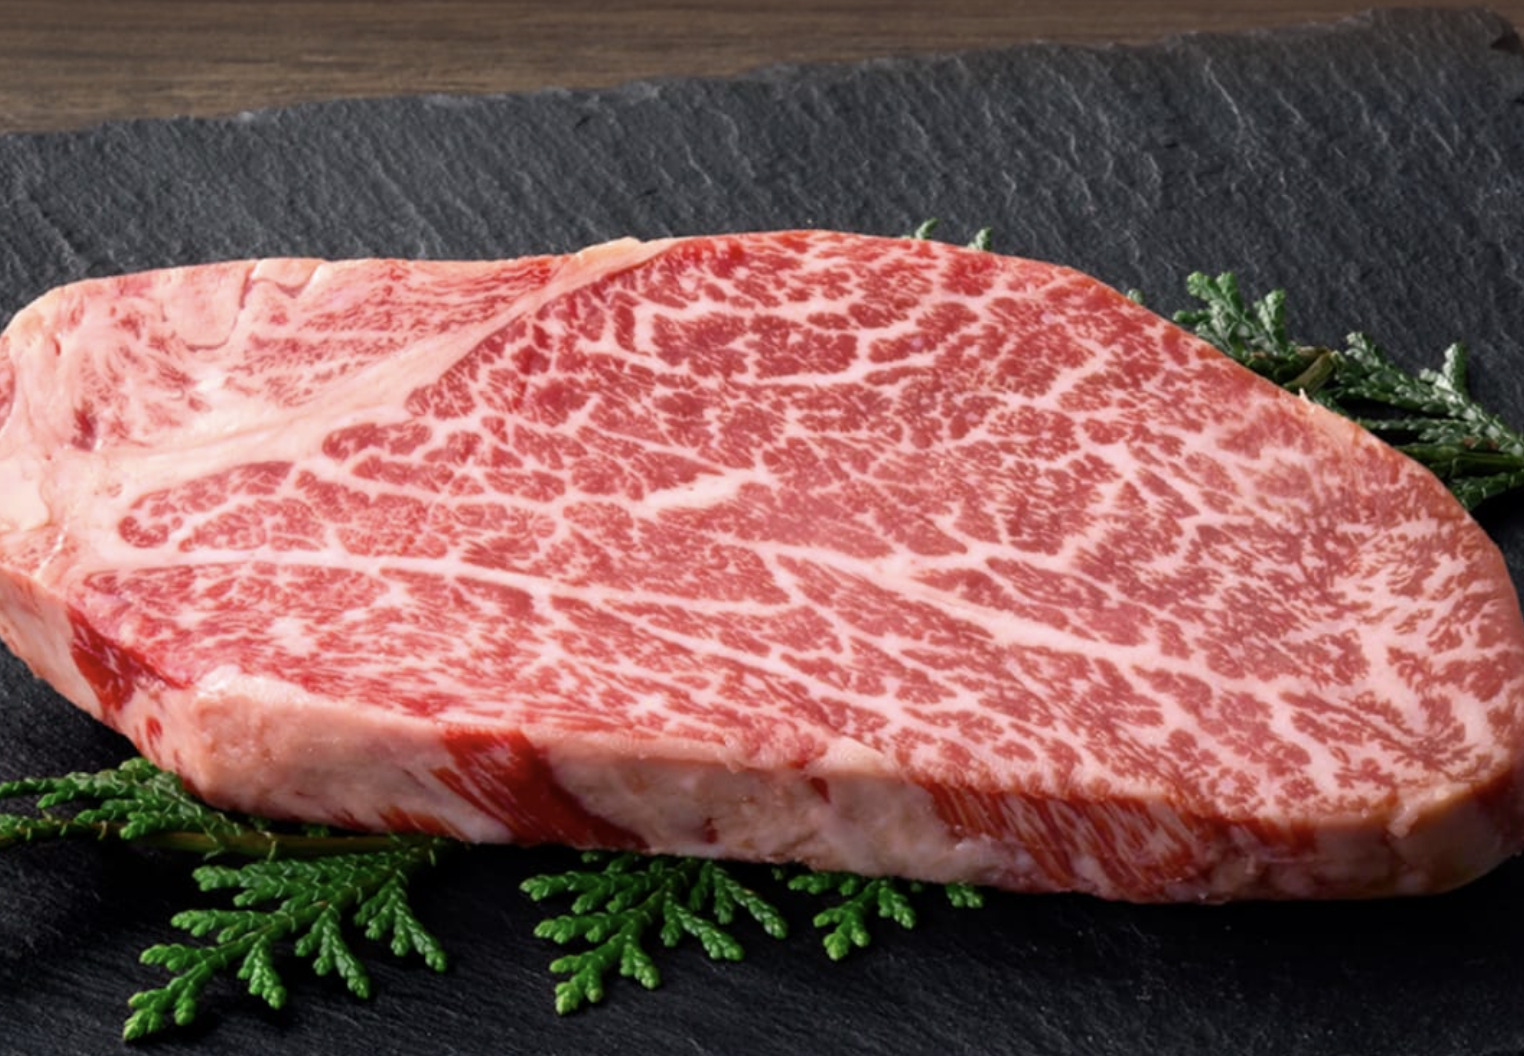 Why is Wagyu beef soft and fatty?